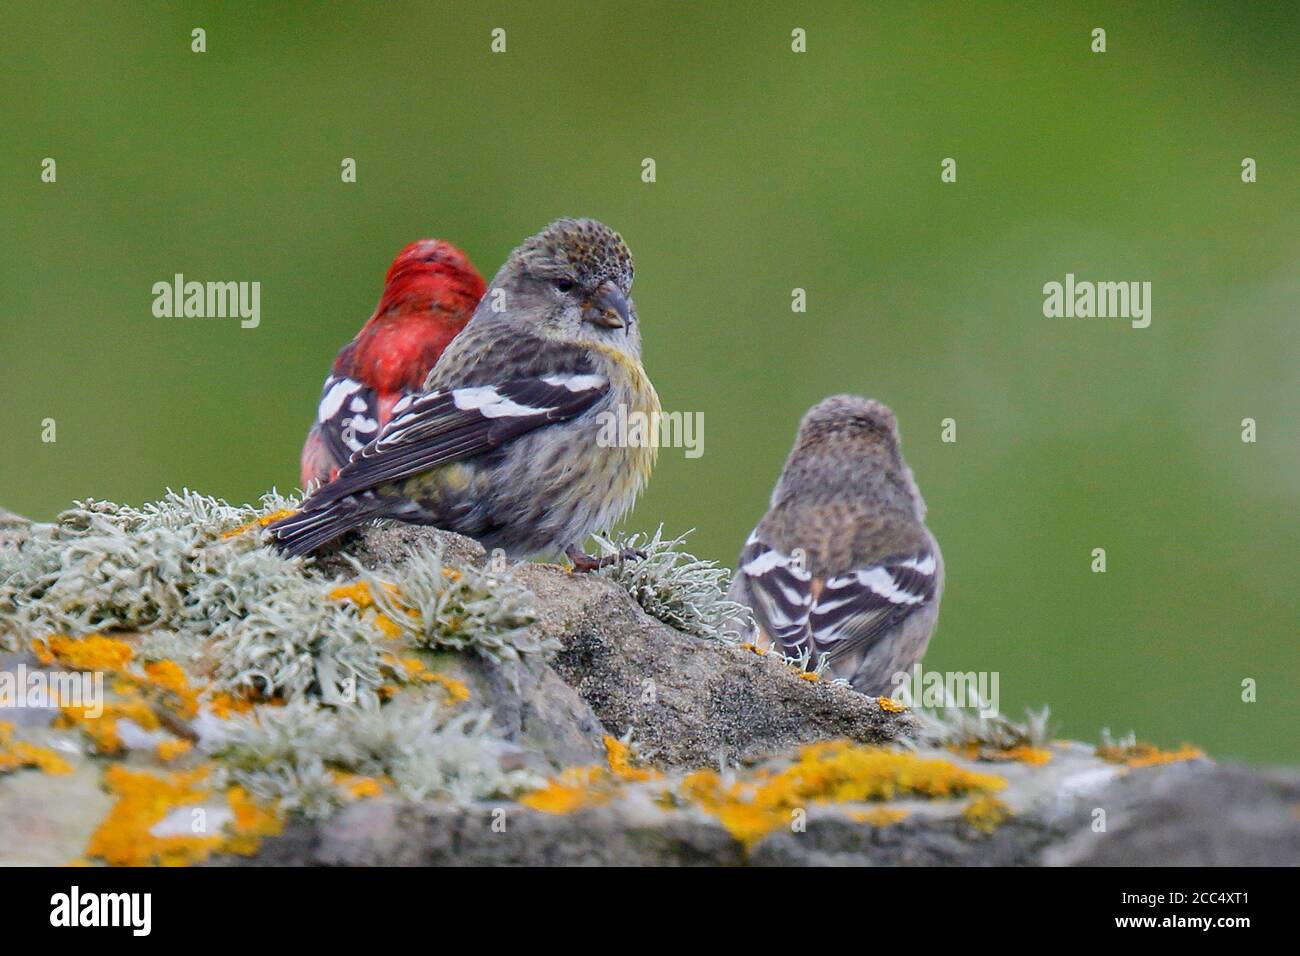 white-winged crossbill, Two-barred Crossbill (Loxia leucoptera), two females and one male perching on a rock during summer invasion, United Kingdom, Stock Photo